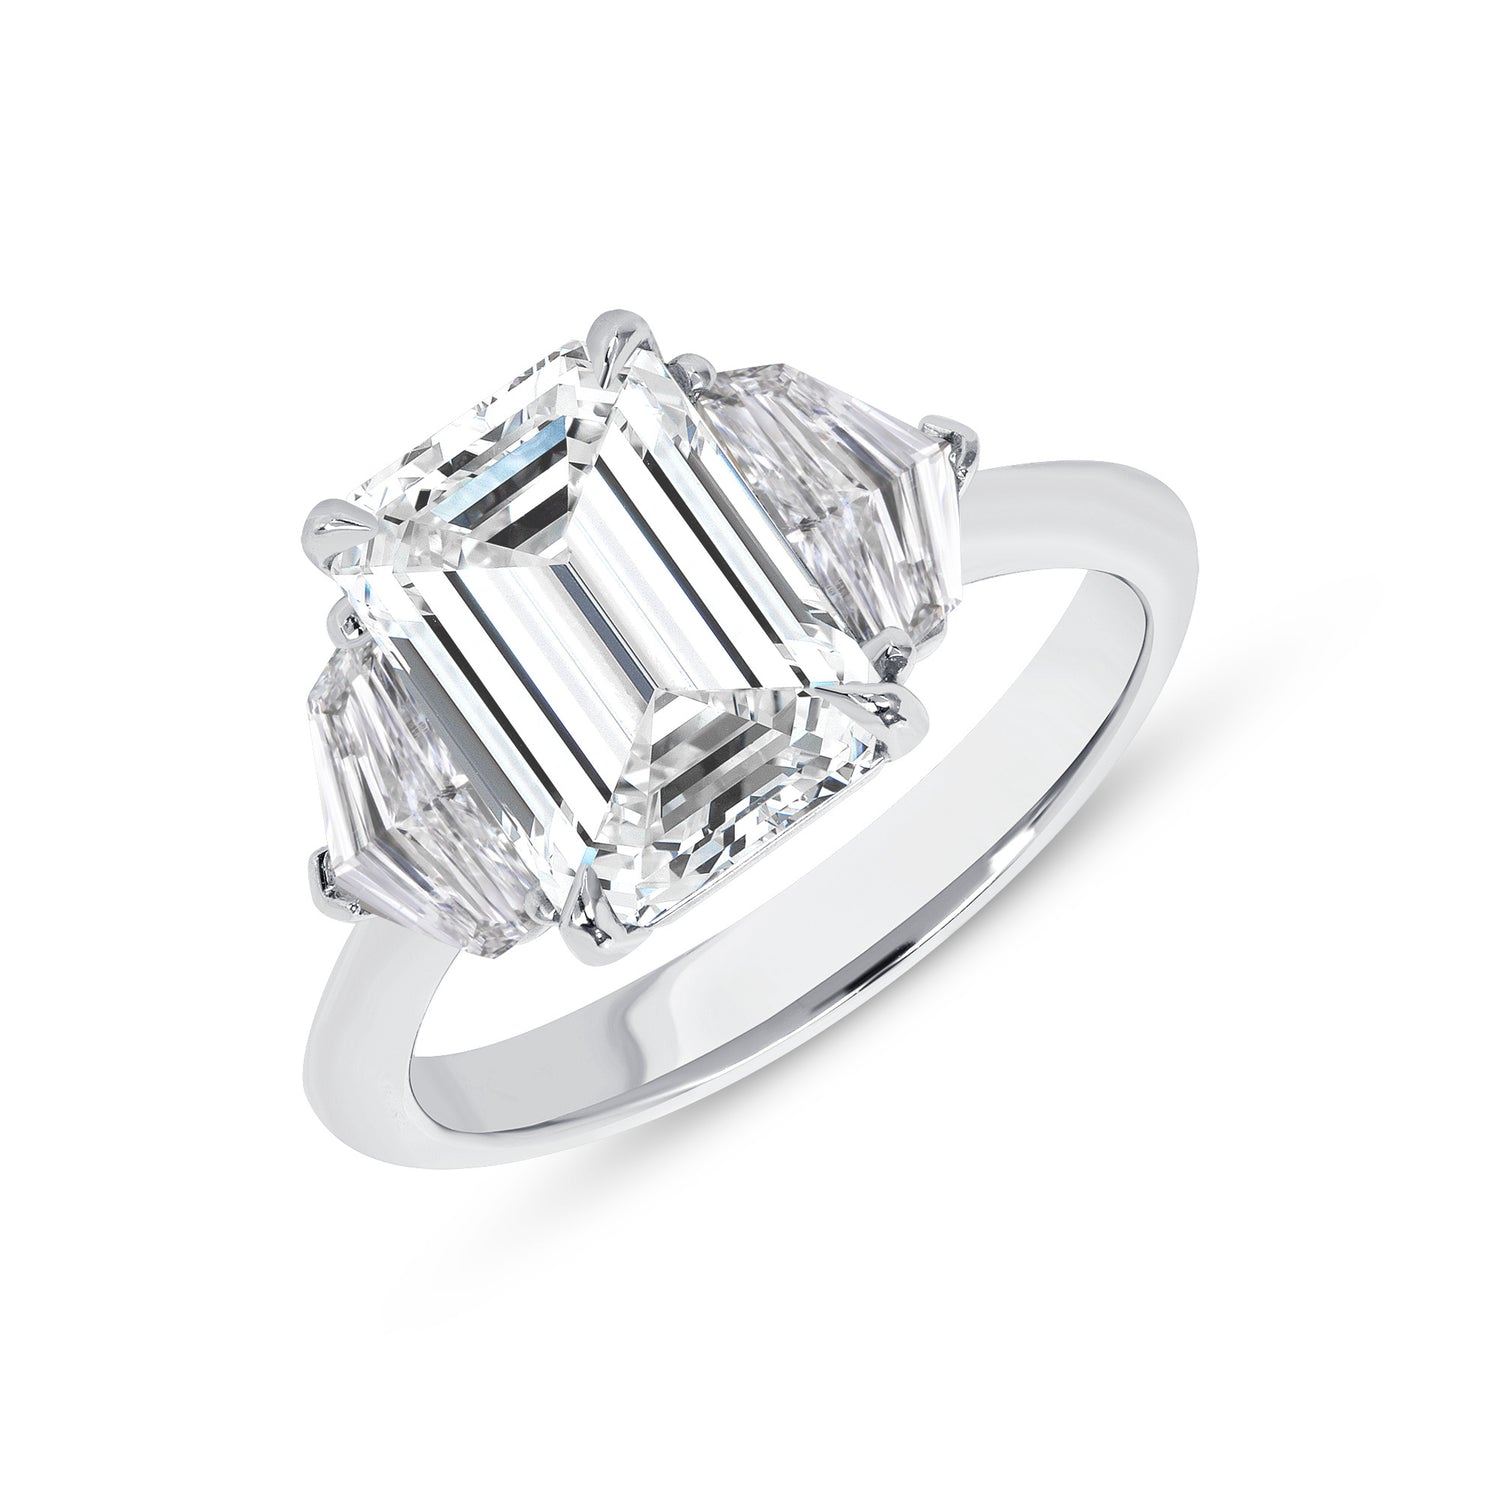 Emerald Cut Diamond Ring with Cadillac Side Stones